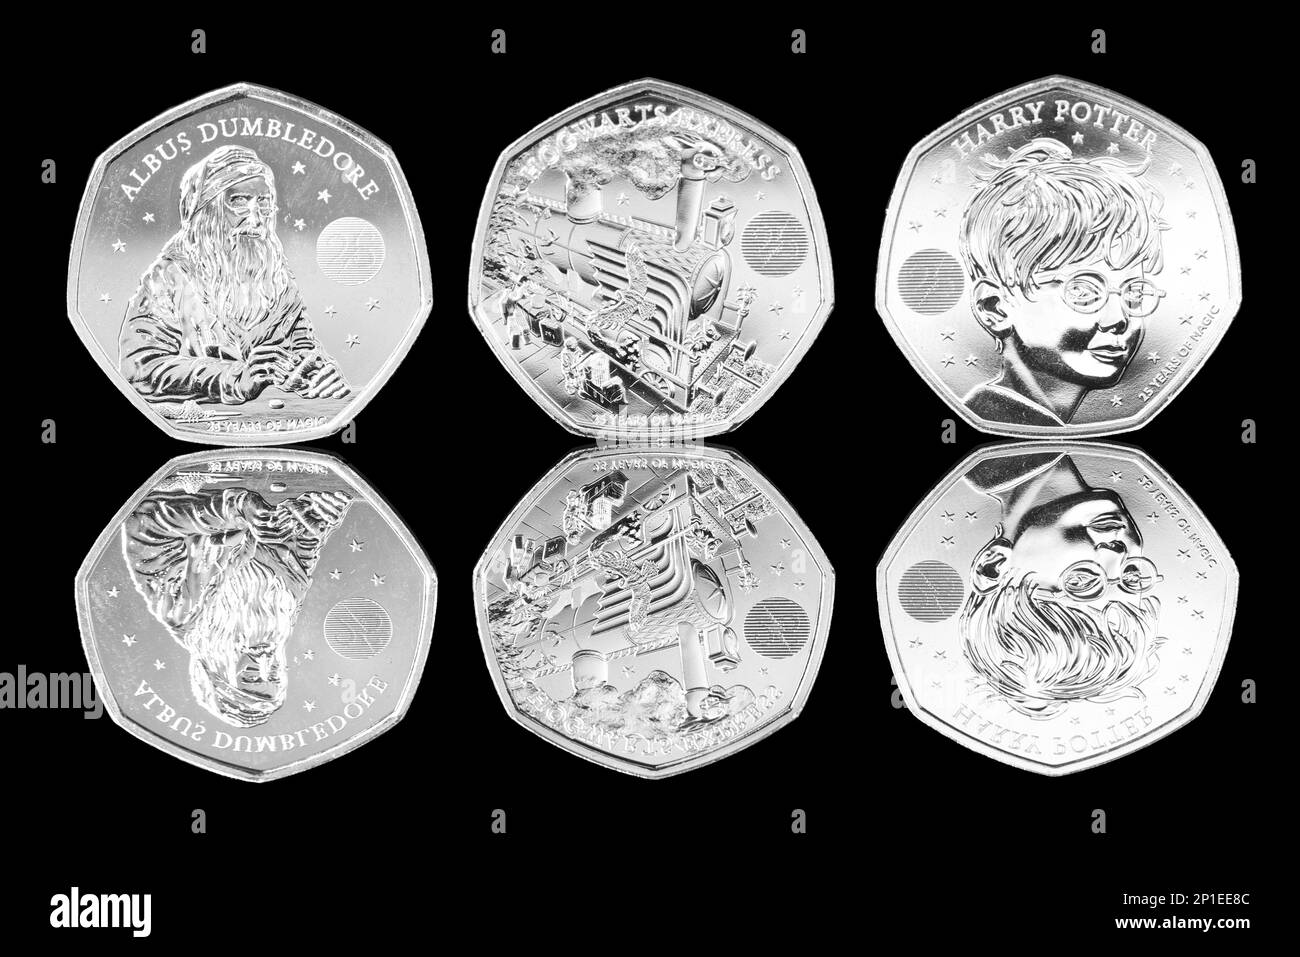 Three 50p coins to commemorate 25 years of Harry Potter. The coins feature Albus Dumbledore, Hogwarts Express & Harry Potter Stock Photo